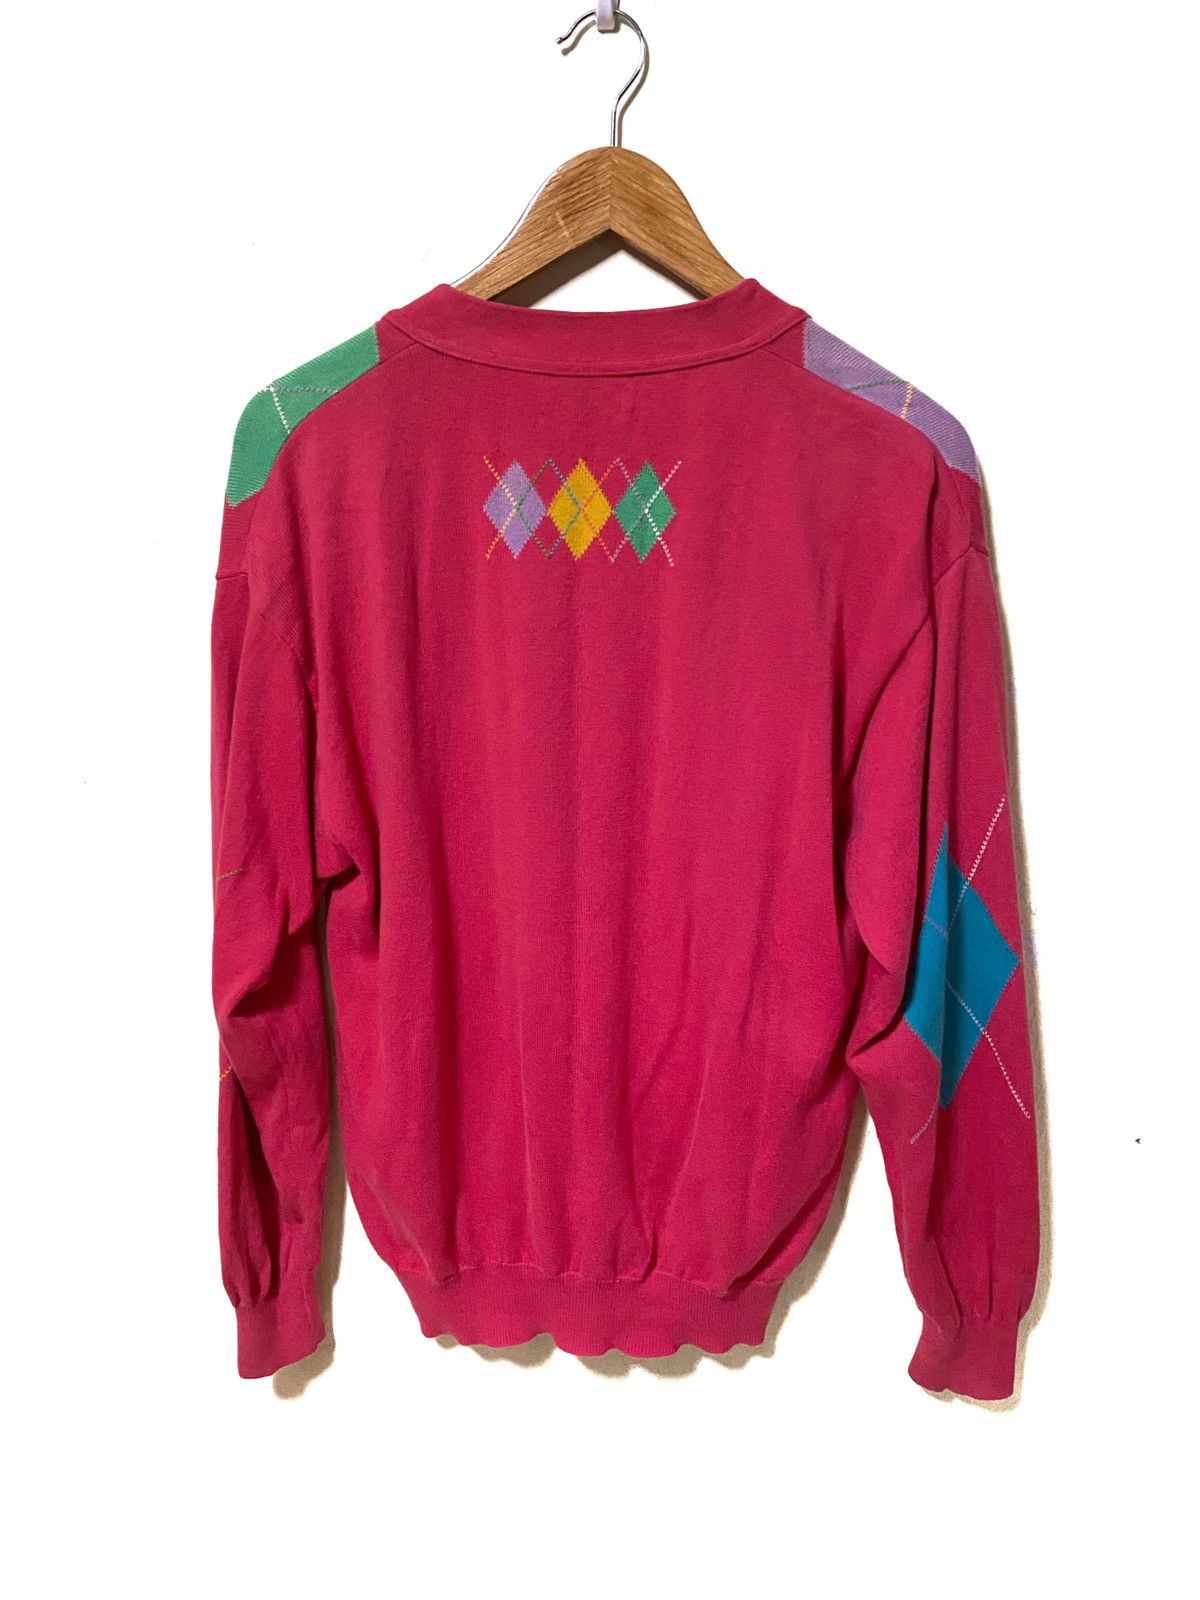 Vintage United Colors of Benetton Multicolor Knit Cardigan - 3